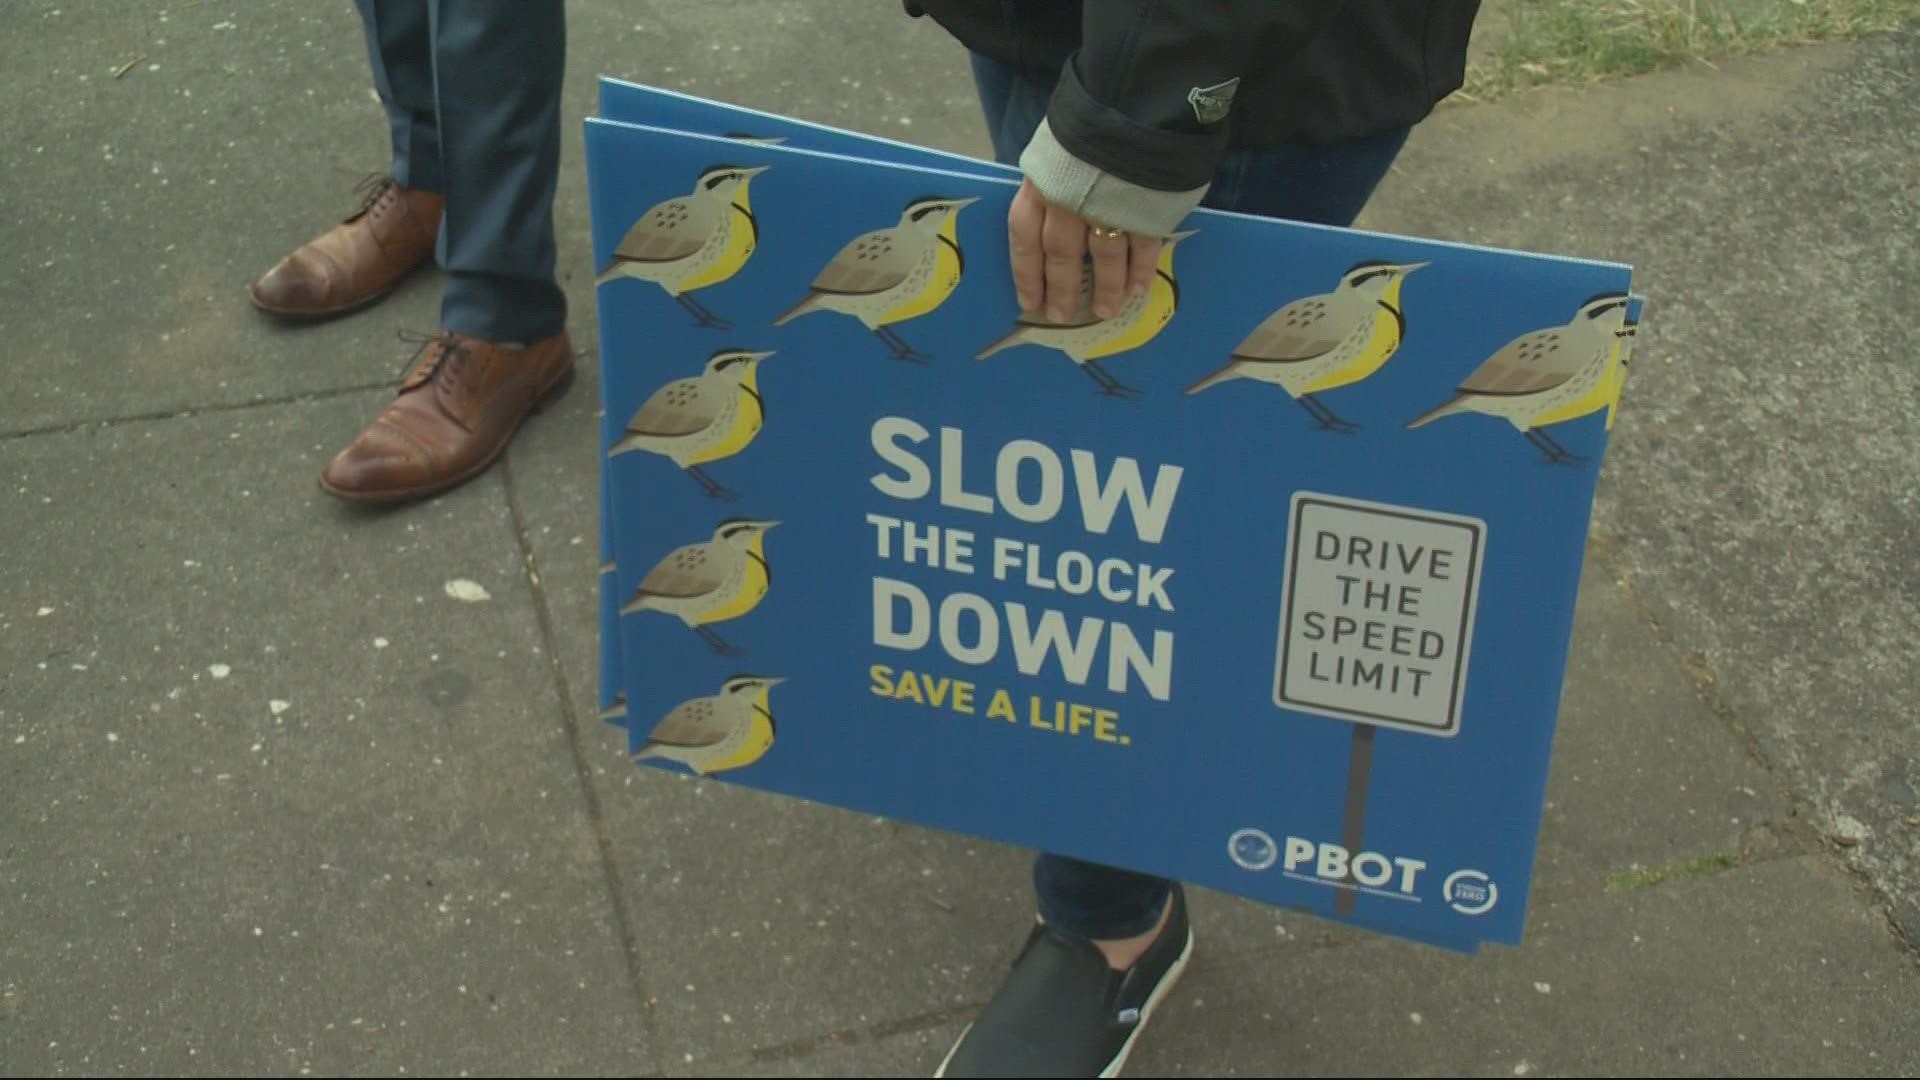 The Portland Bureau of Transportation is spending about $120,000 on signs with the message 'Slow the Flock Down.' The aim is to curb serious crashes.